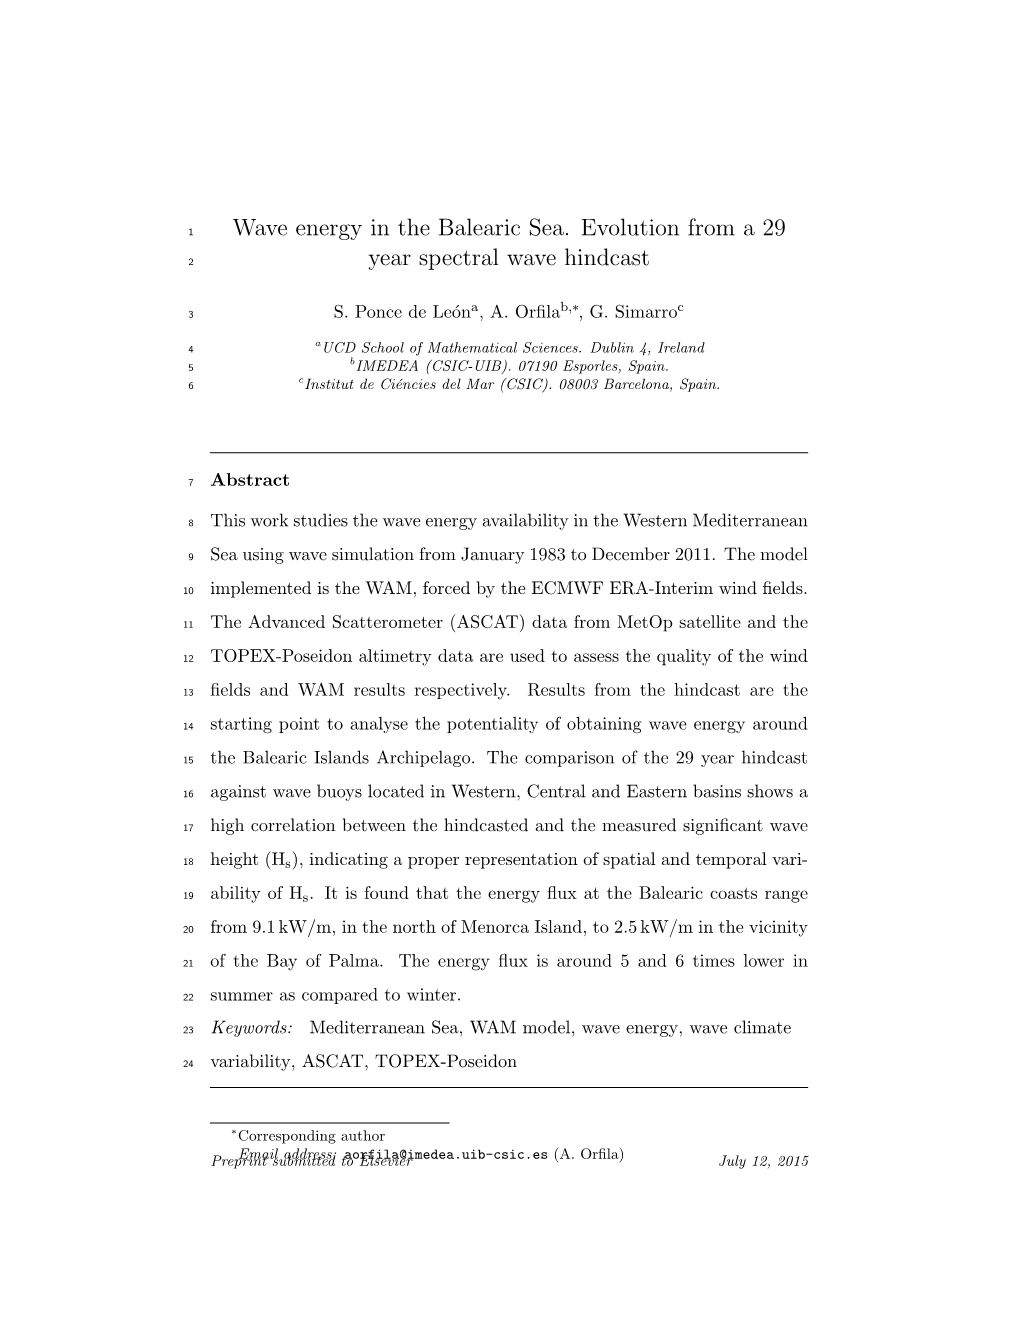 Wave Energy in the Balearic Sea. Evolution from a 29 Year Spectral Wave Hindcast